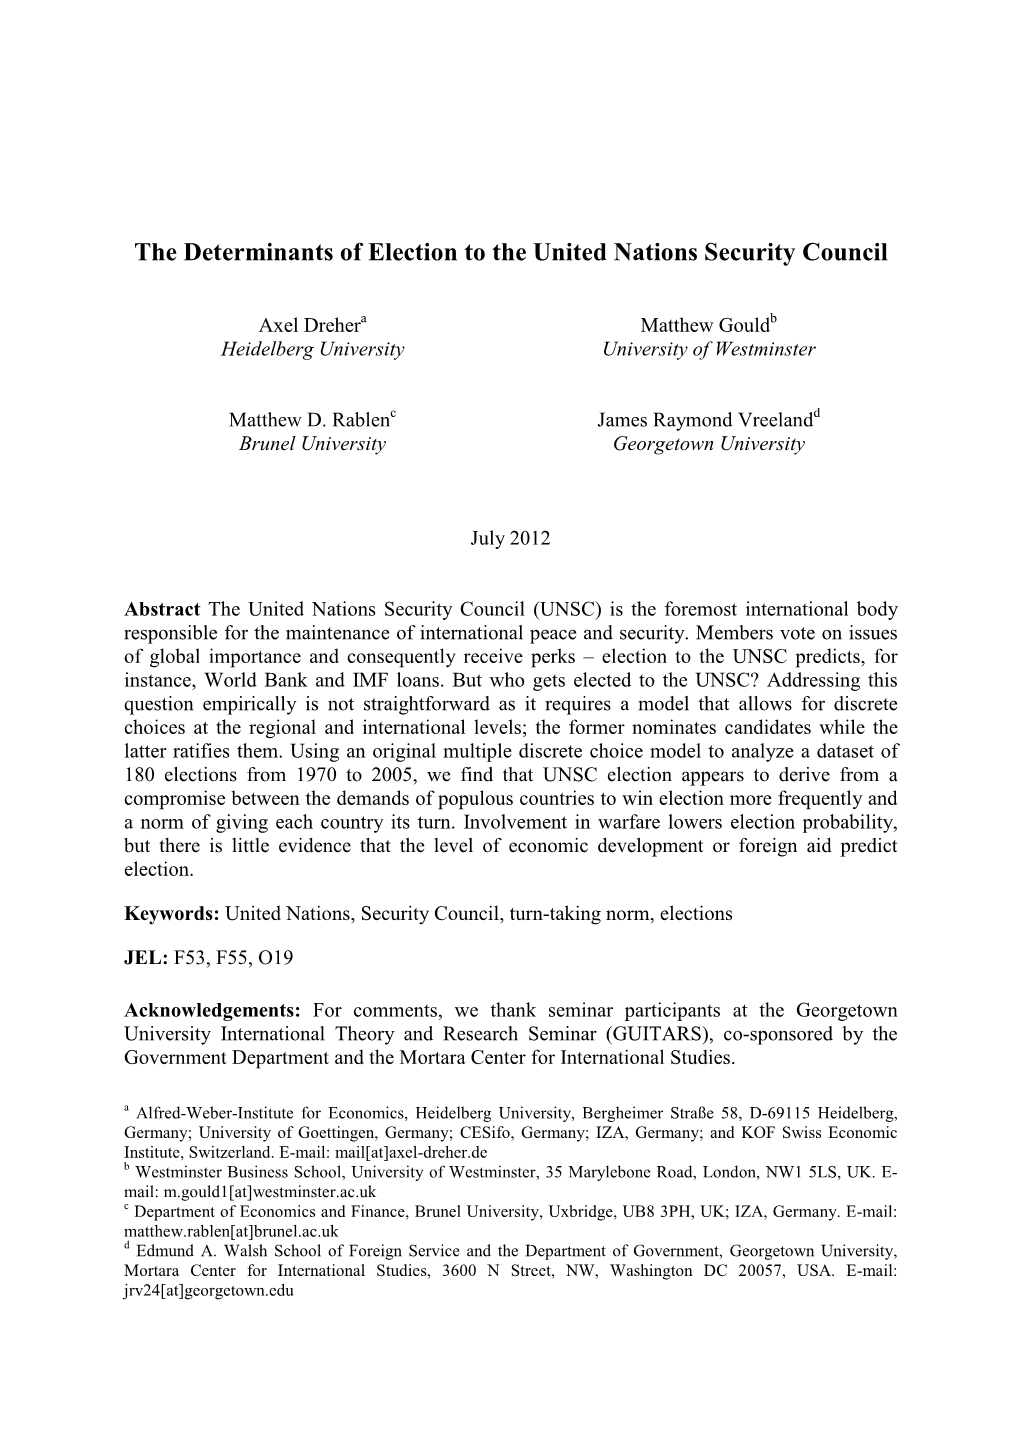 The Determinants of Election to the United Nations Security Council